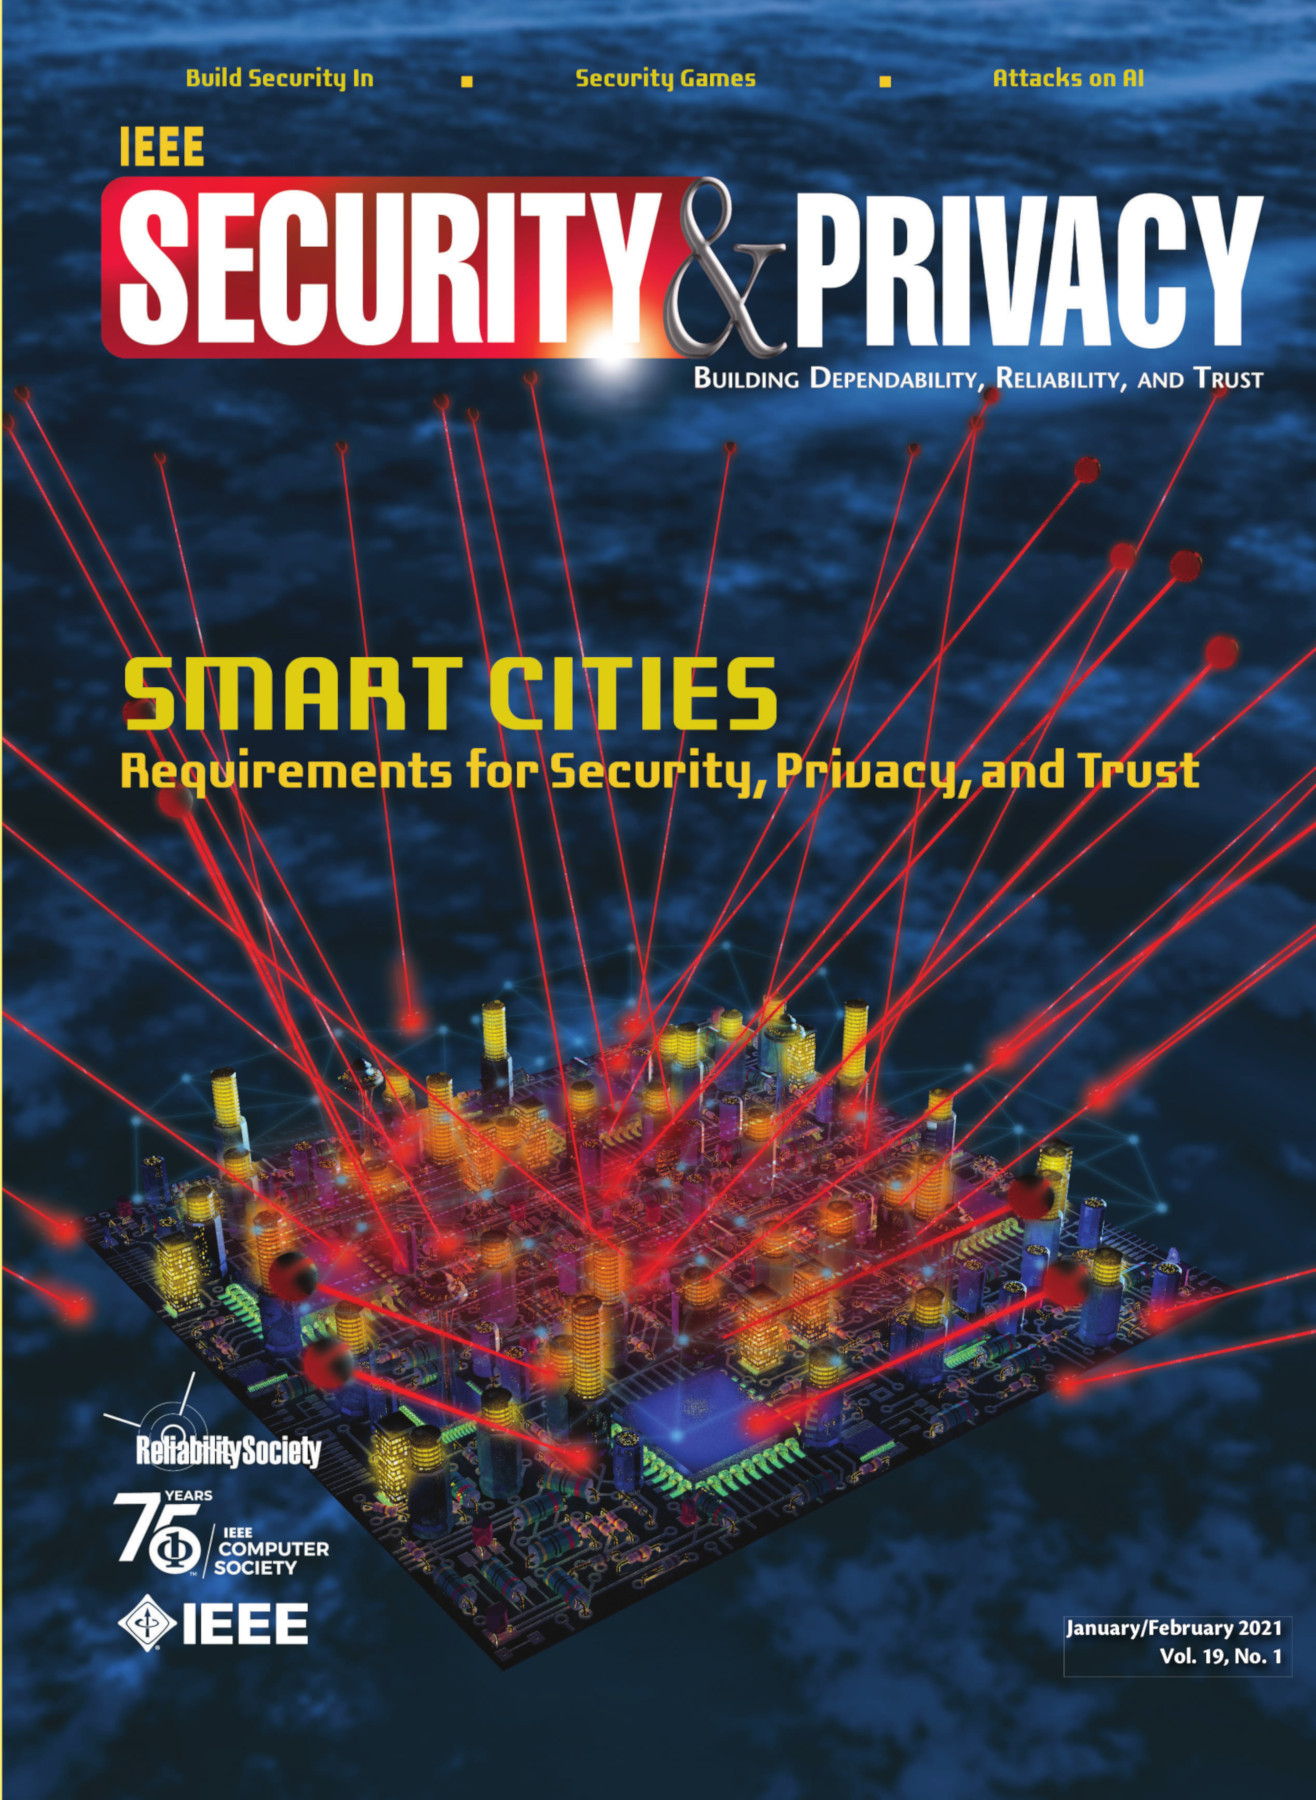 IEEE Security & Privacy January/February 2021 Vol. 19 No. 1